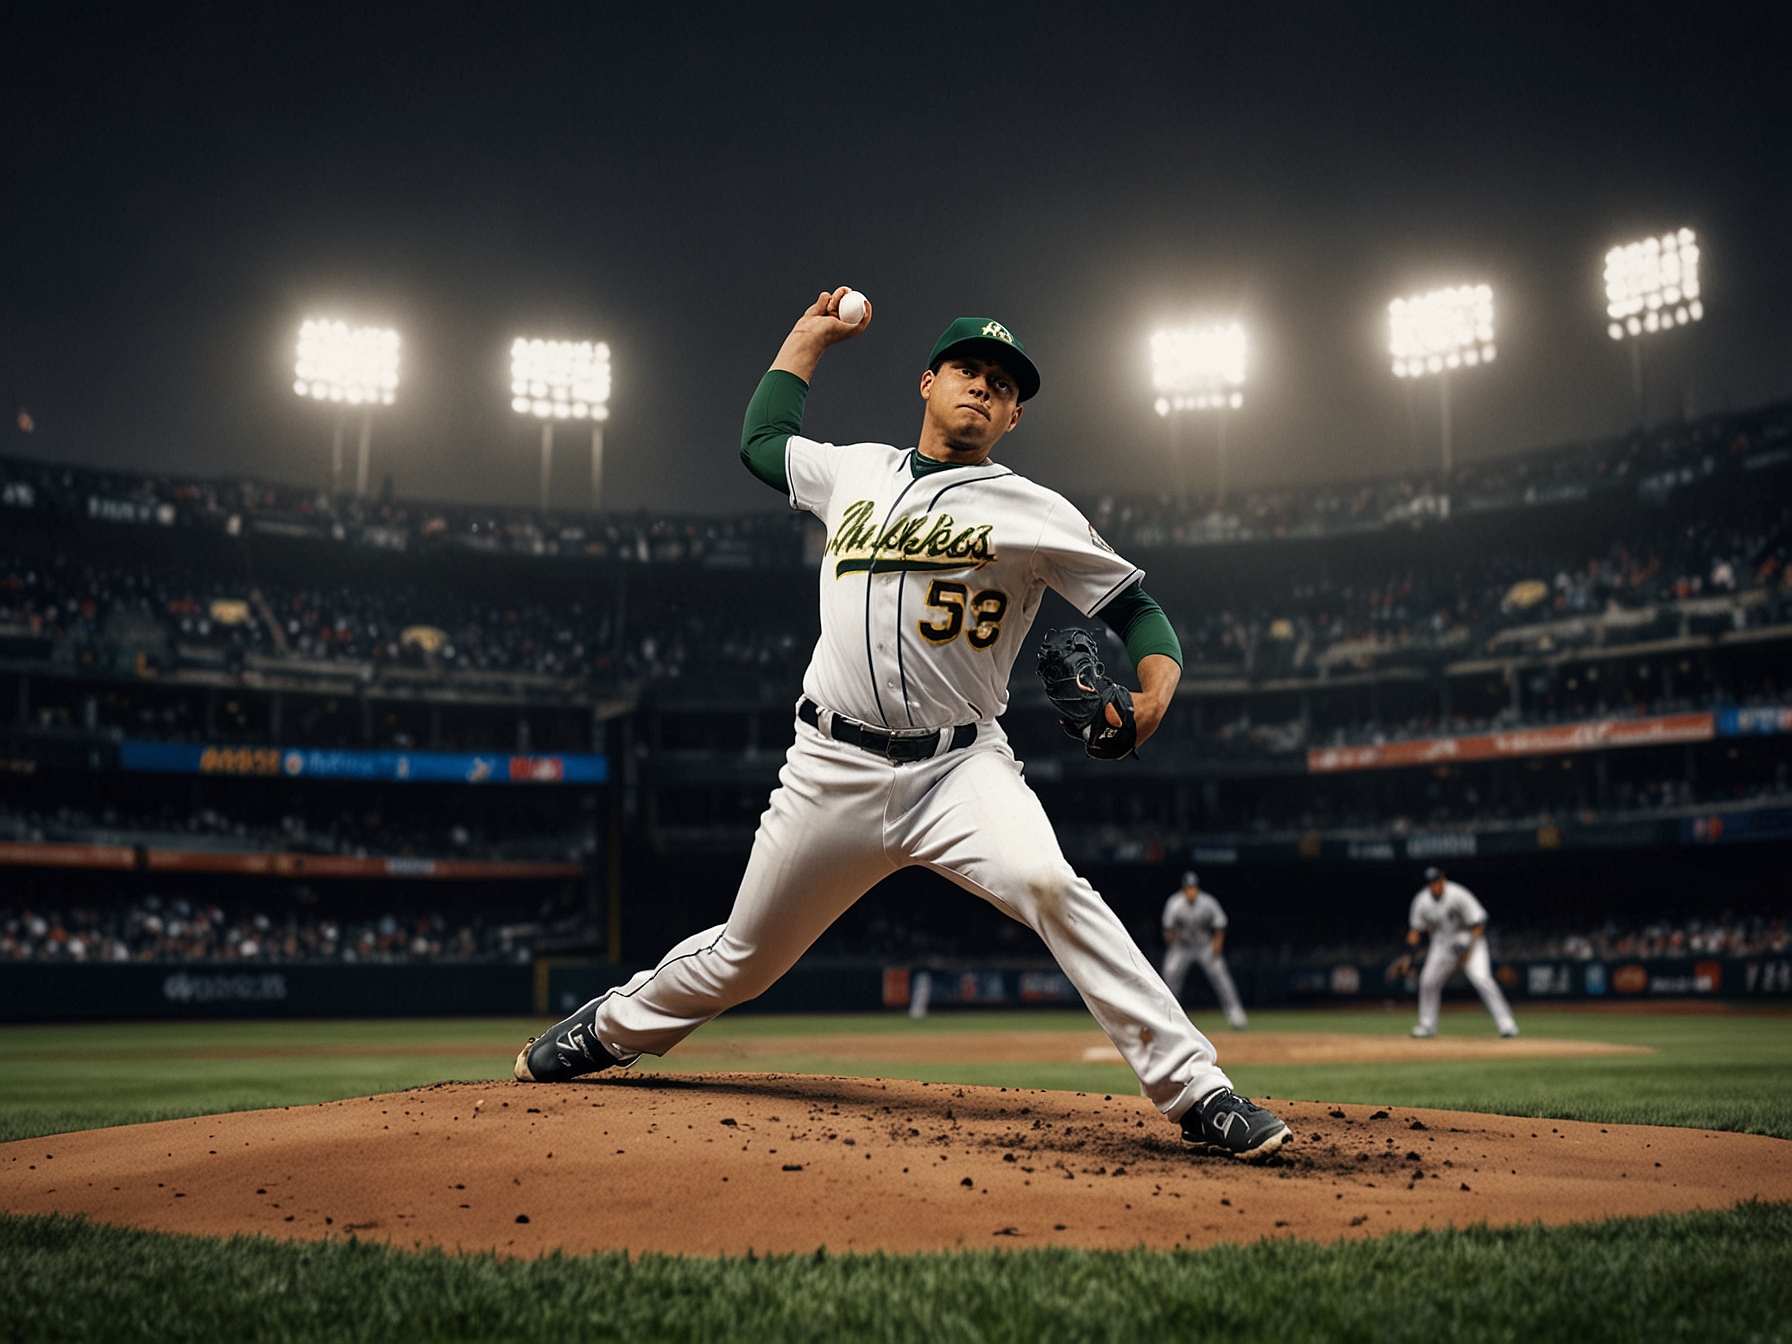 Sean Manaea in mid-pitch, showcasing his precision and control against the Yankees at Citi Field. The stadium background and crowd emphasize the high-stakes environment.